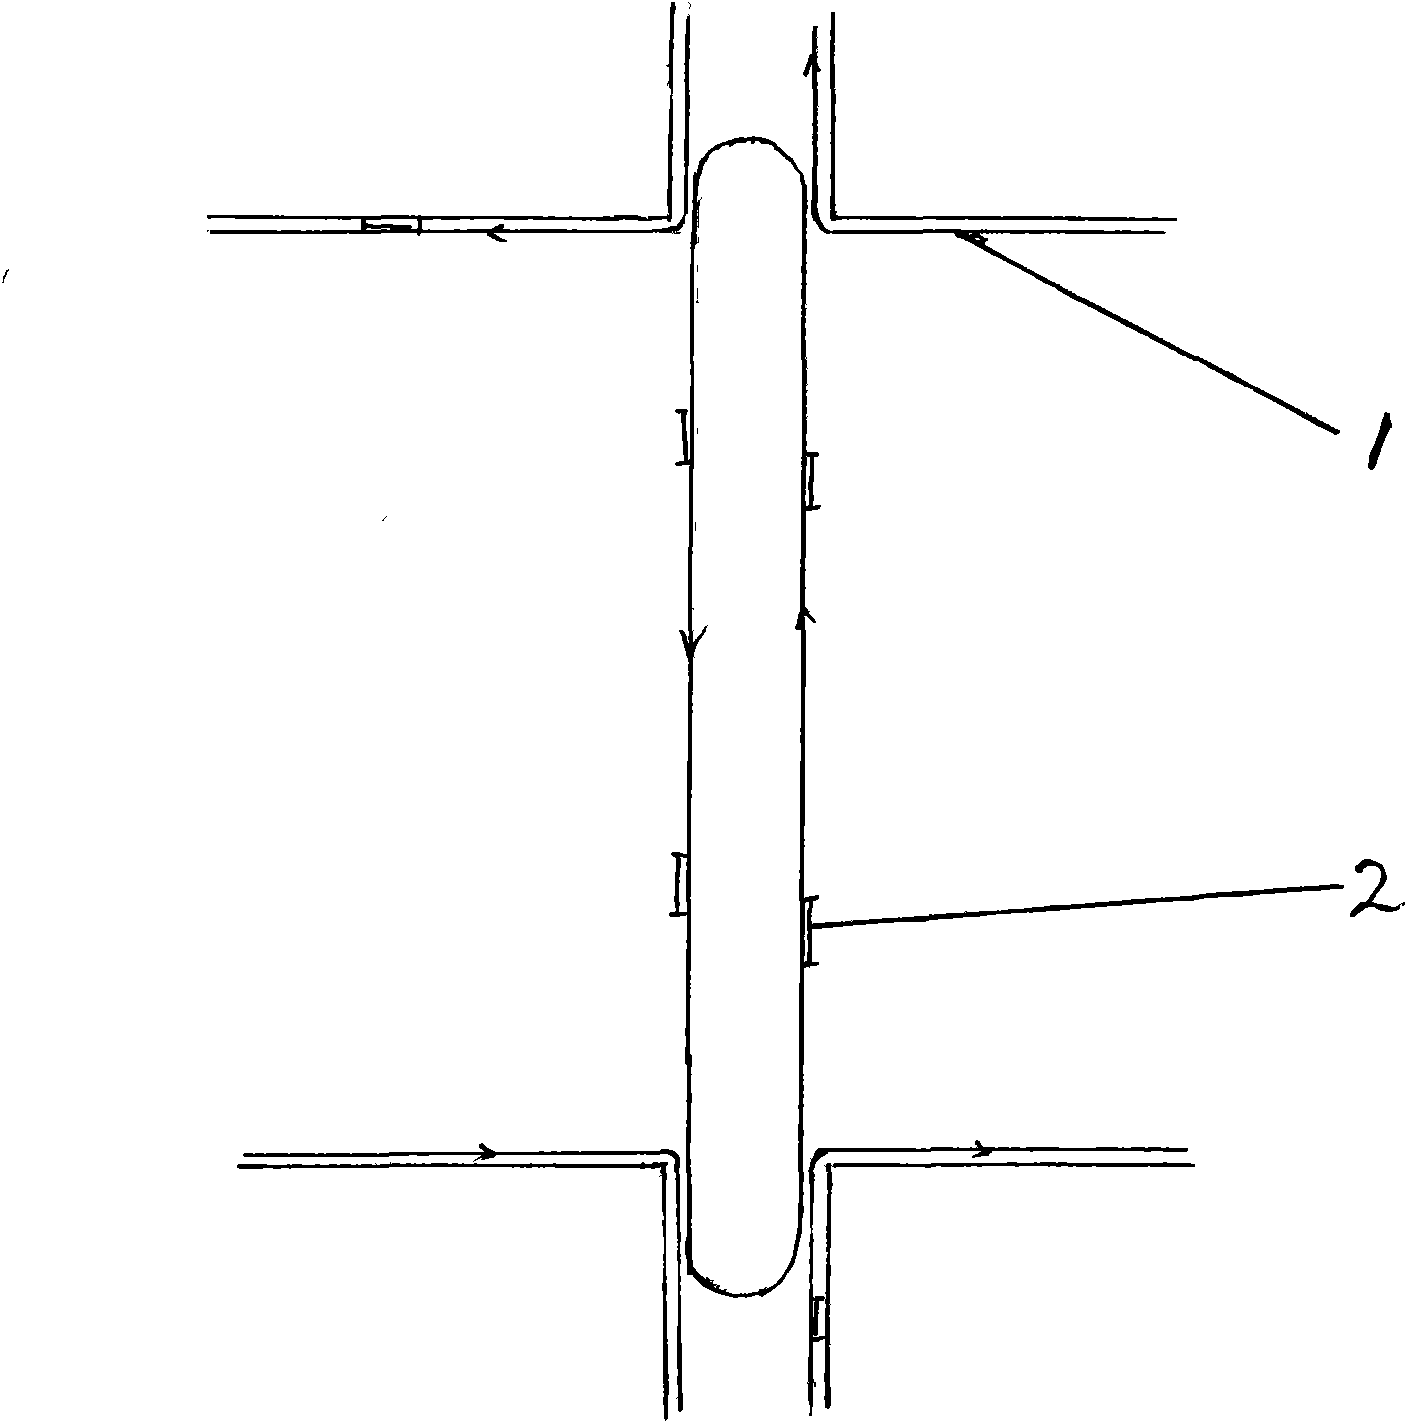 Continuous conveying type urban track traffic system